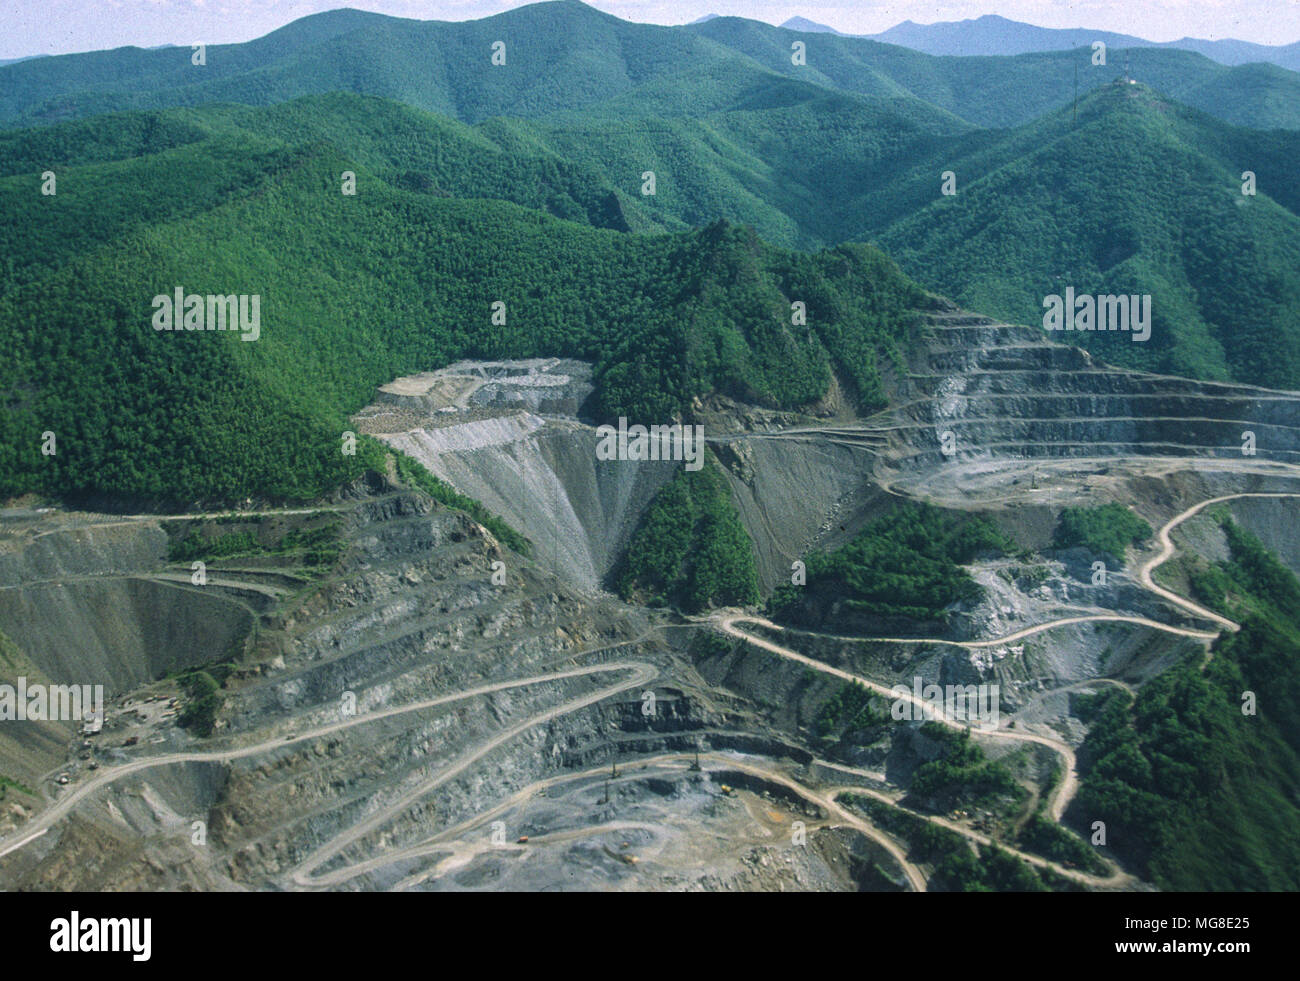 Massive mine at Dalnegorsk, Russian Far East. Mineral deposits contain boron, tin, iron, but boron is major product shipped to numerous contries. Stock Photo